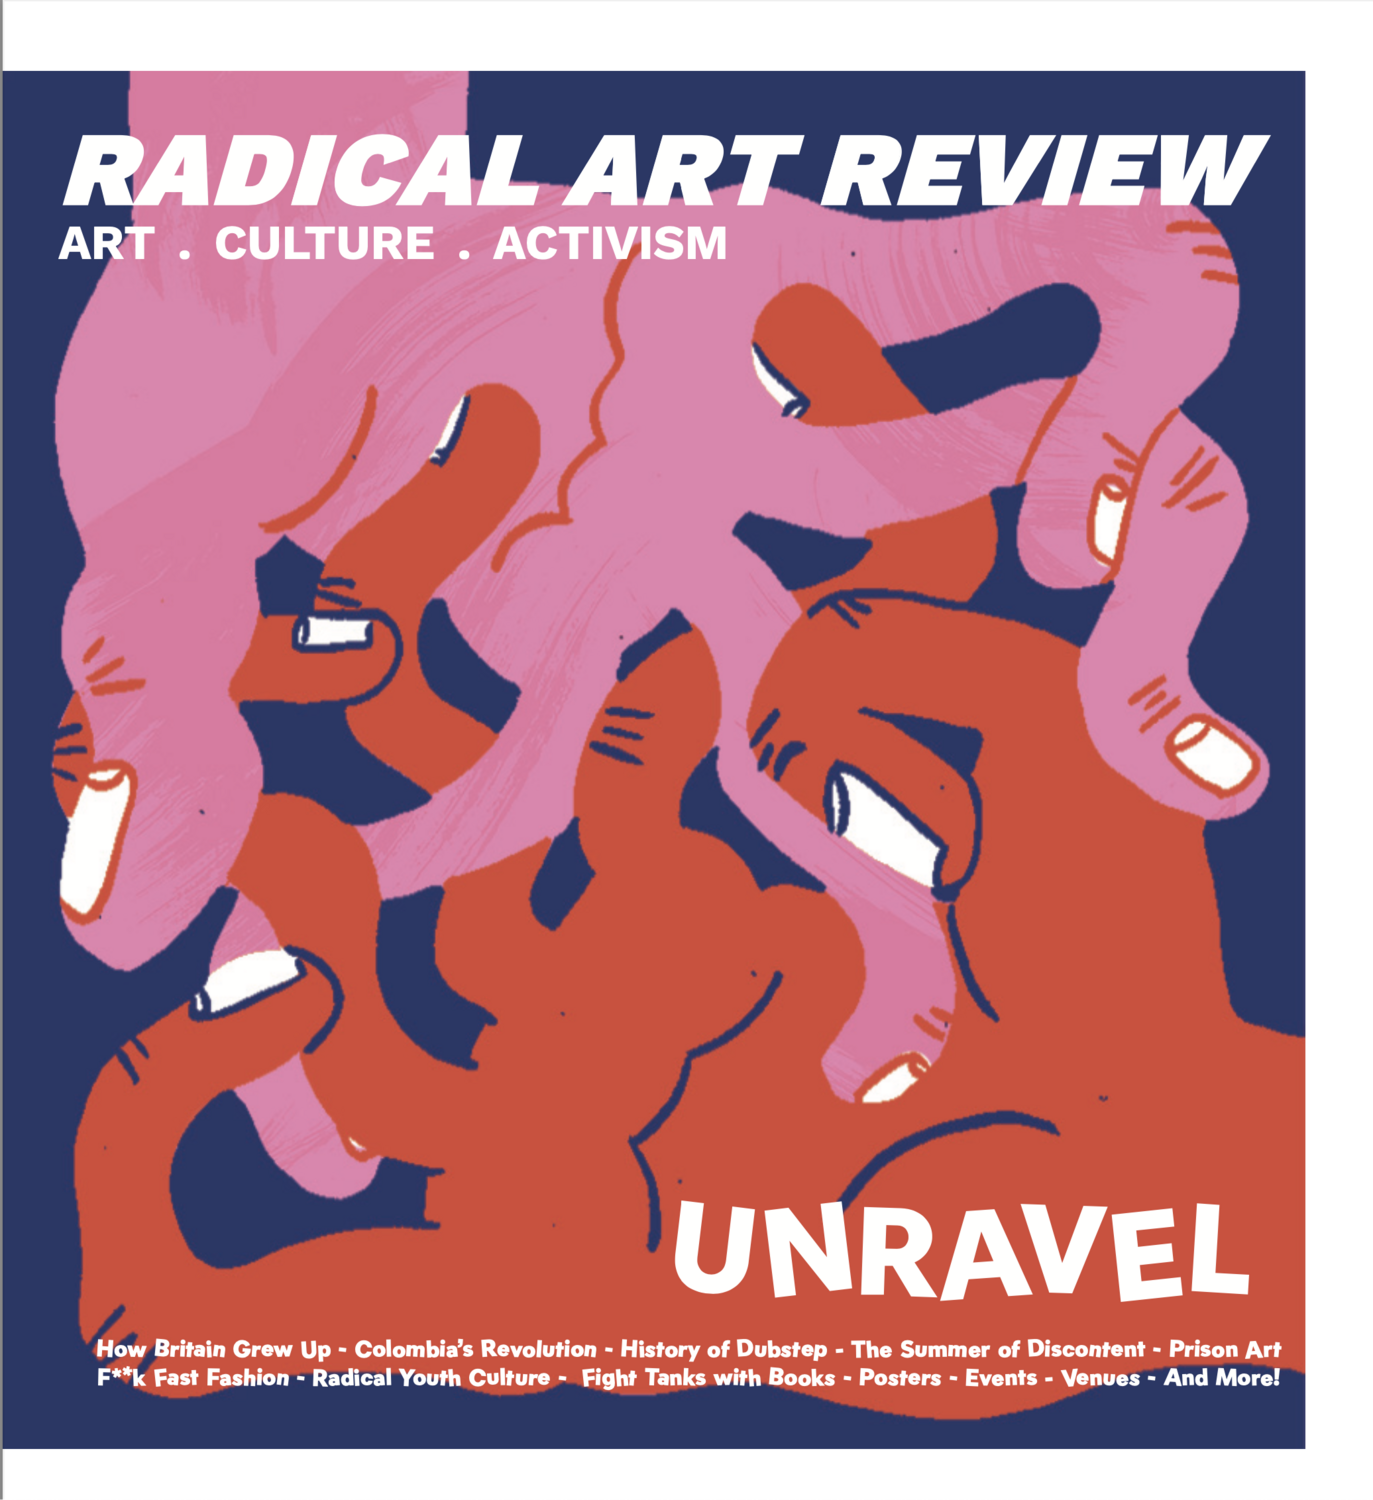 ISSUE #9: UNRAVEL